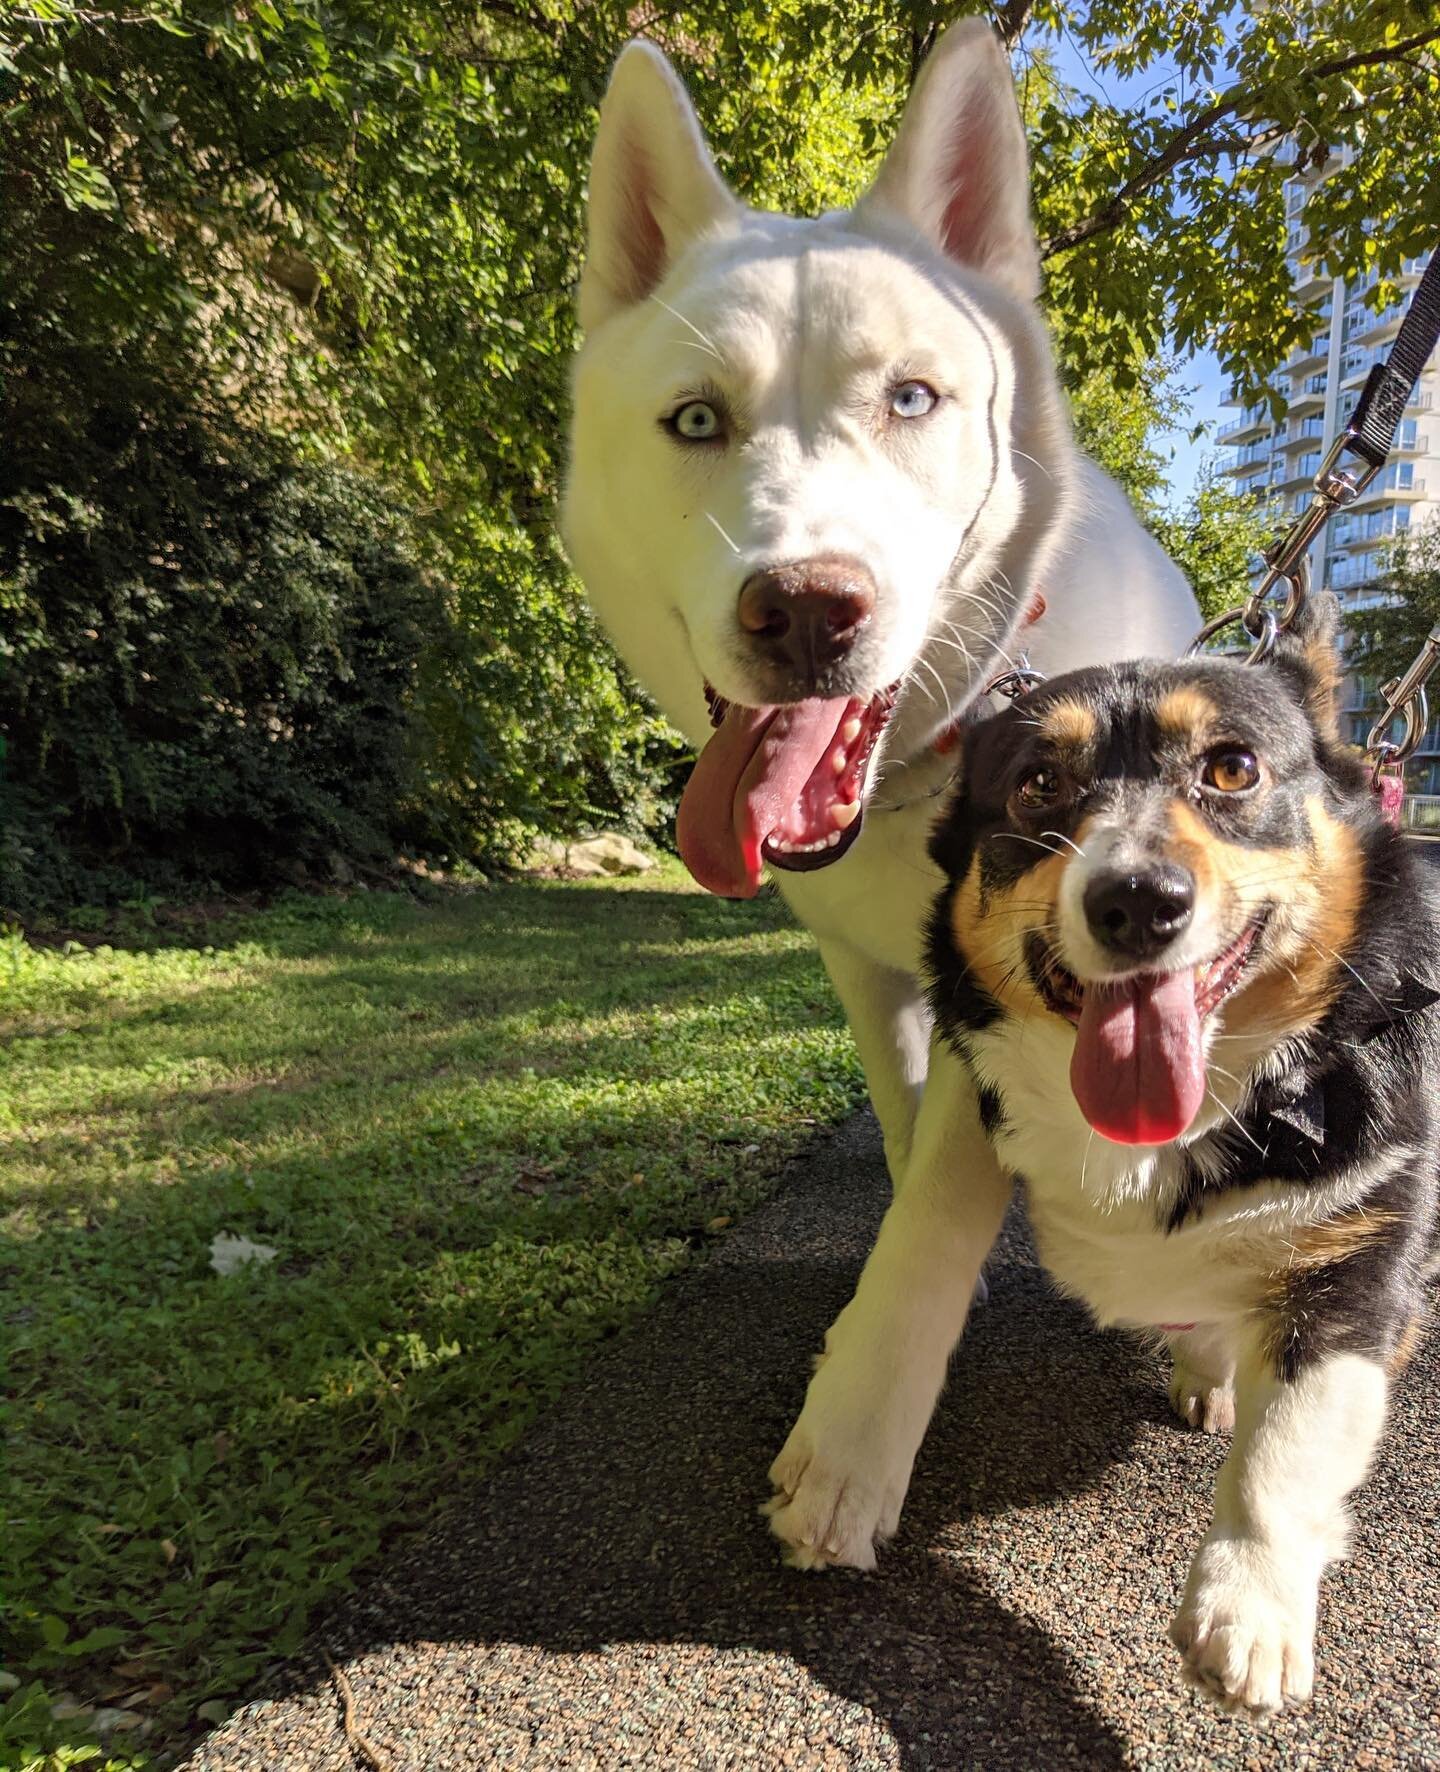 When you&rsquo;re the cutest duo on the Katy Trail! 😉 Welcome Ghost &amp; Sophie to the Club! 😍🐾
.
.
.
#cute #duo #dogwalk #dogwalking #husky #huskypuppy #huskylove #huskiesofinstagram #puppy #puppygram #puppiesofinstagram #puppylove #dogsofinstag